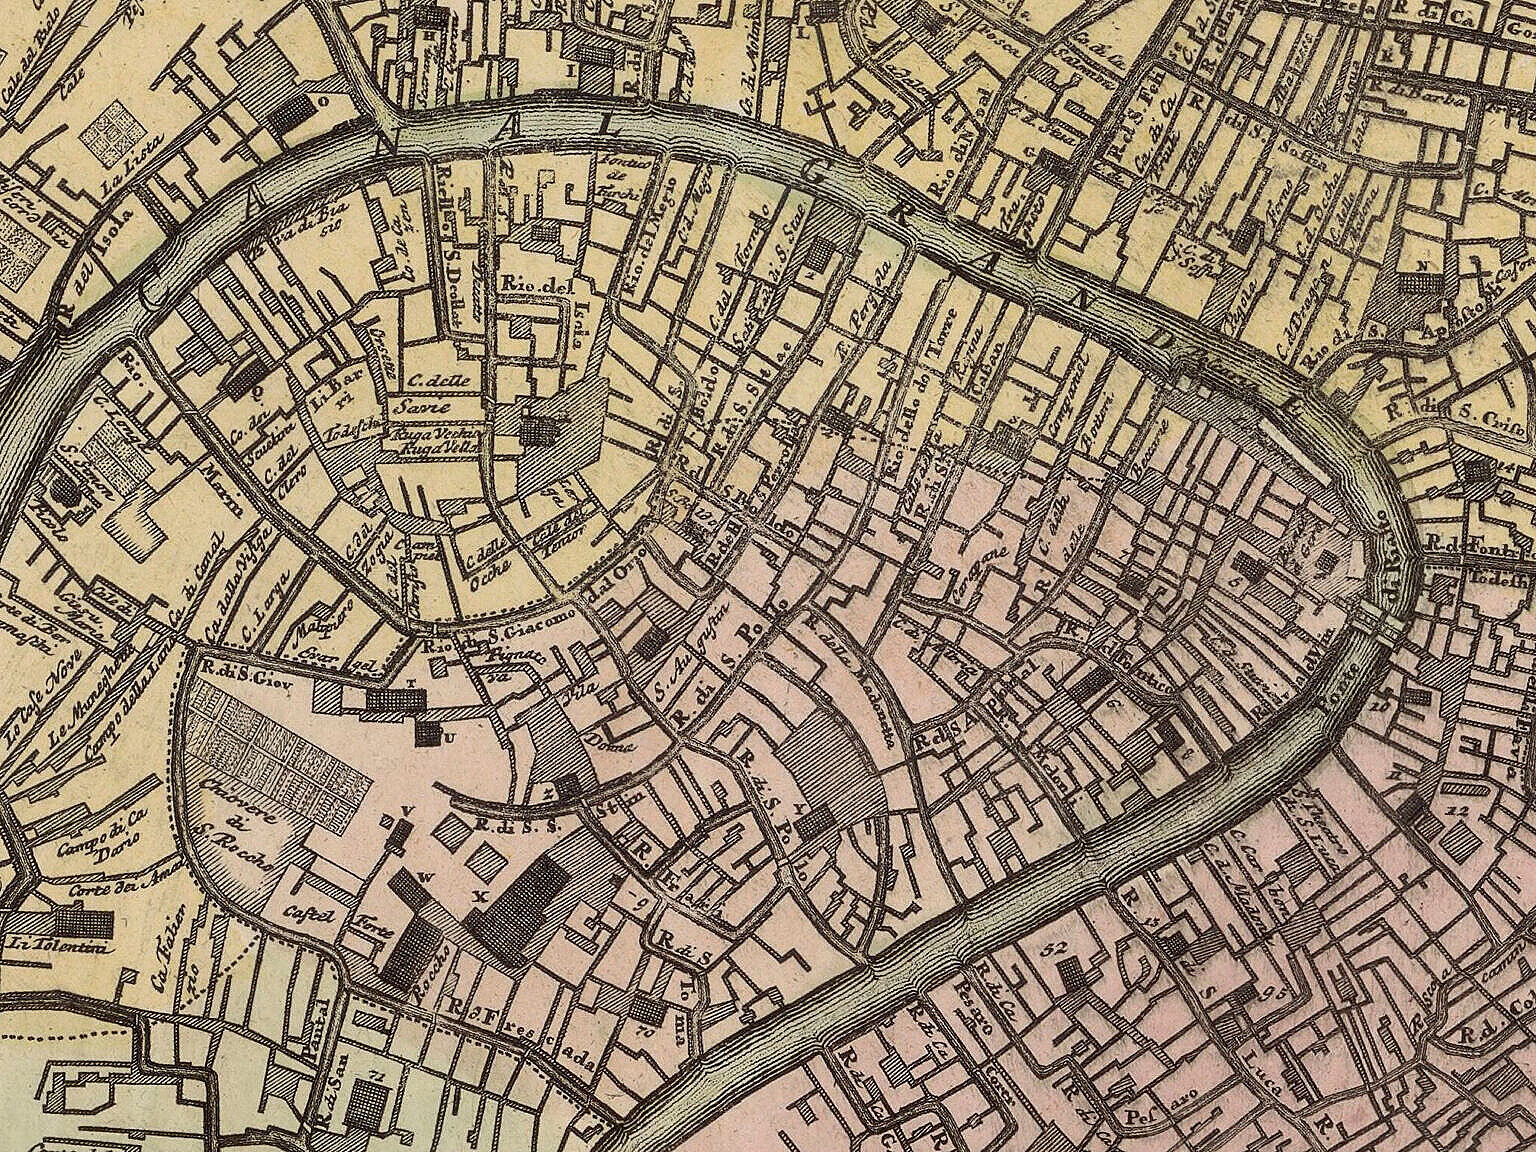 The Sestiere San Polo on a map of Venice from 1729